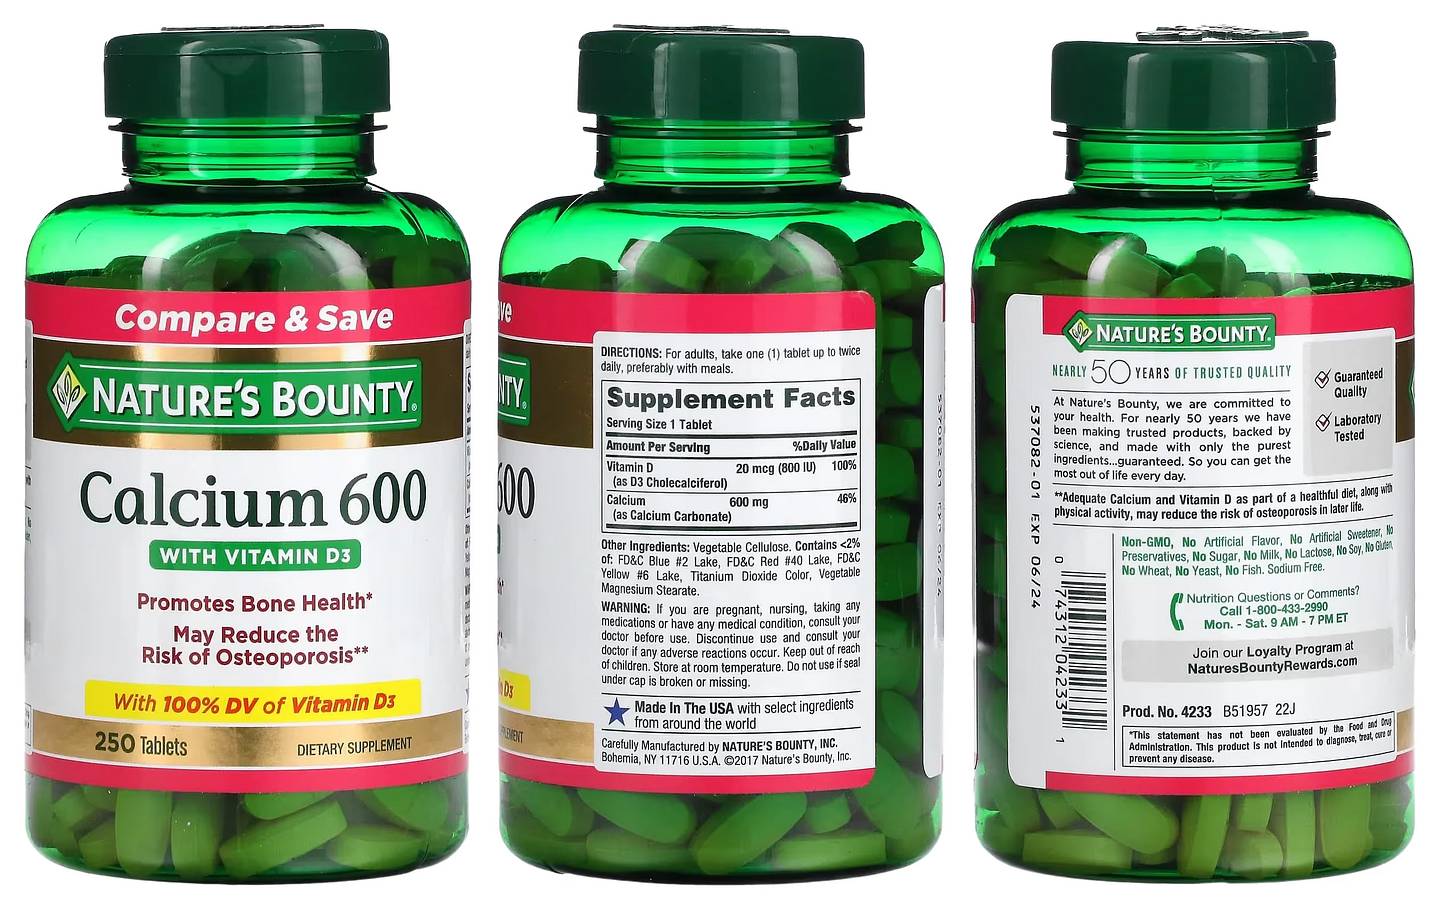 Nature's Bounty, Calcium 600 with Vitamin D3 packaging